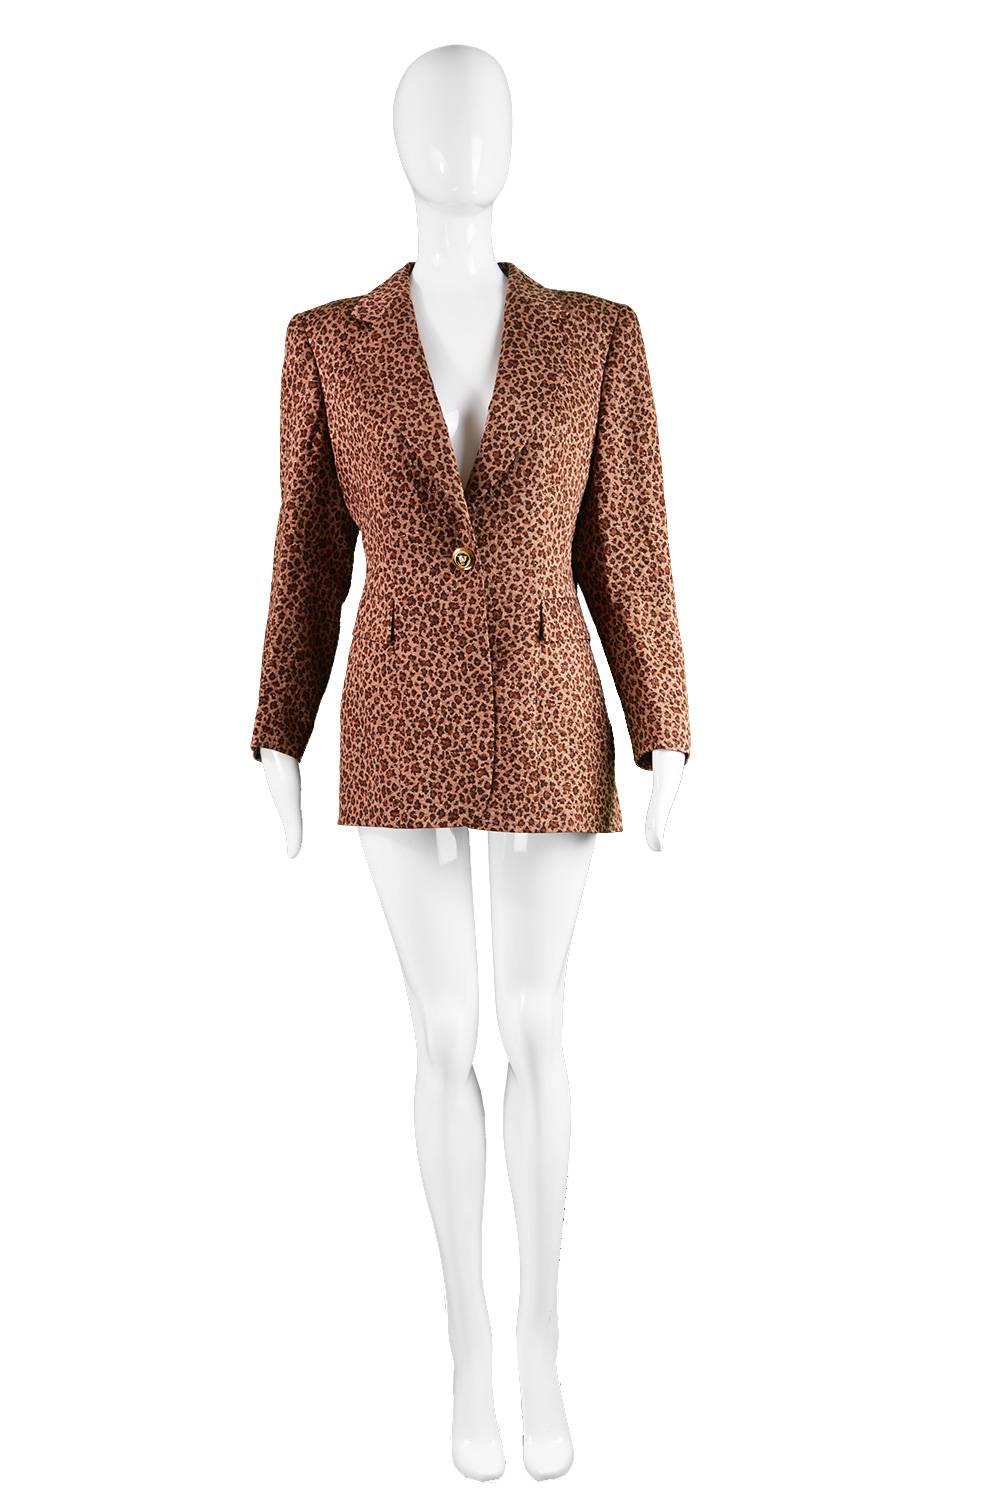 A beautiful vintage women's blazer from the 1980s by luxury designer, Margaretha Ley for Escada. In a silk & wool leopard print fabric with sparkly gold lurex running throughout - such a quintessential animal print and this take is so timeless and